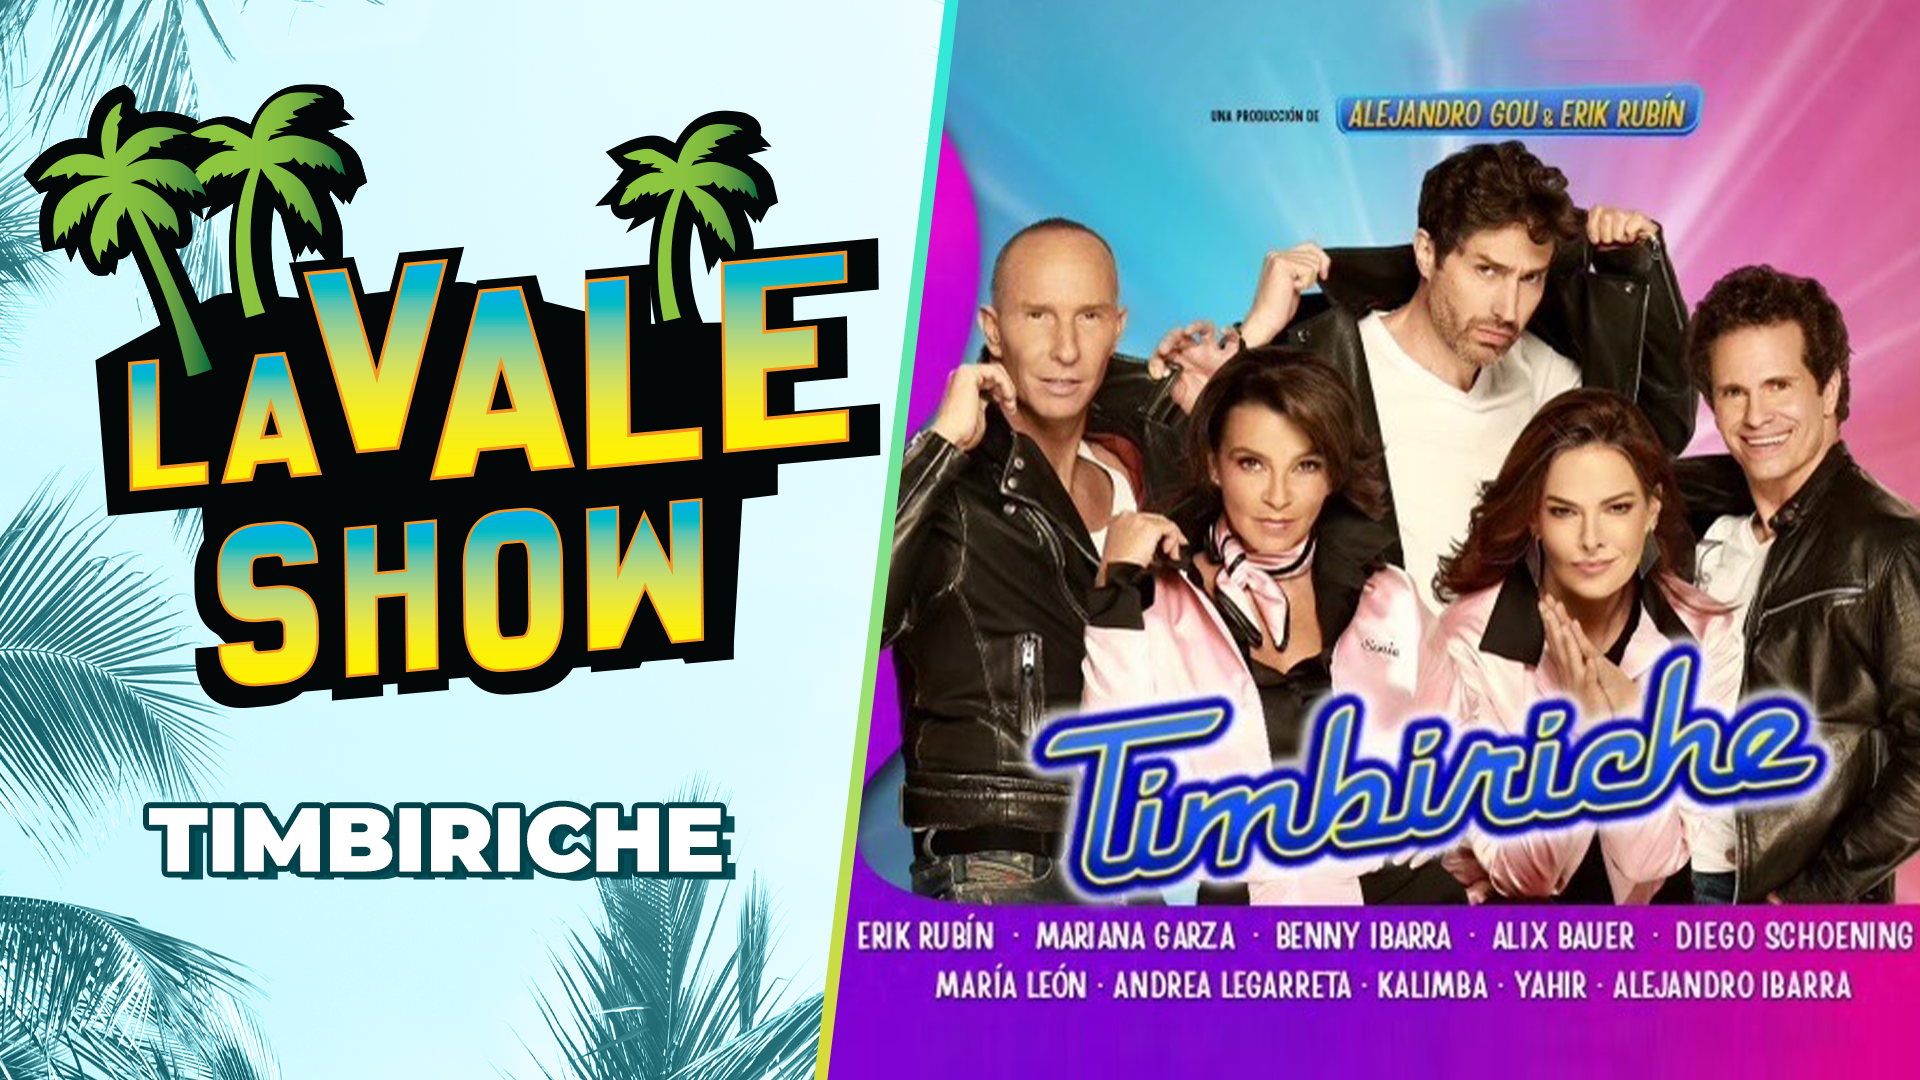 Timbiriche, Kalimba, & Angelica Vale Share Their Excitement To Be In “Vaselina” The Musical